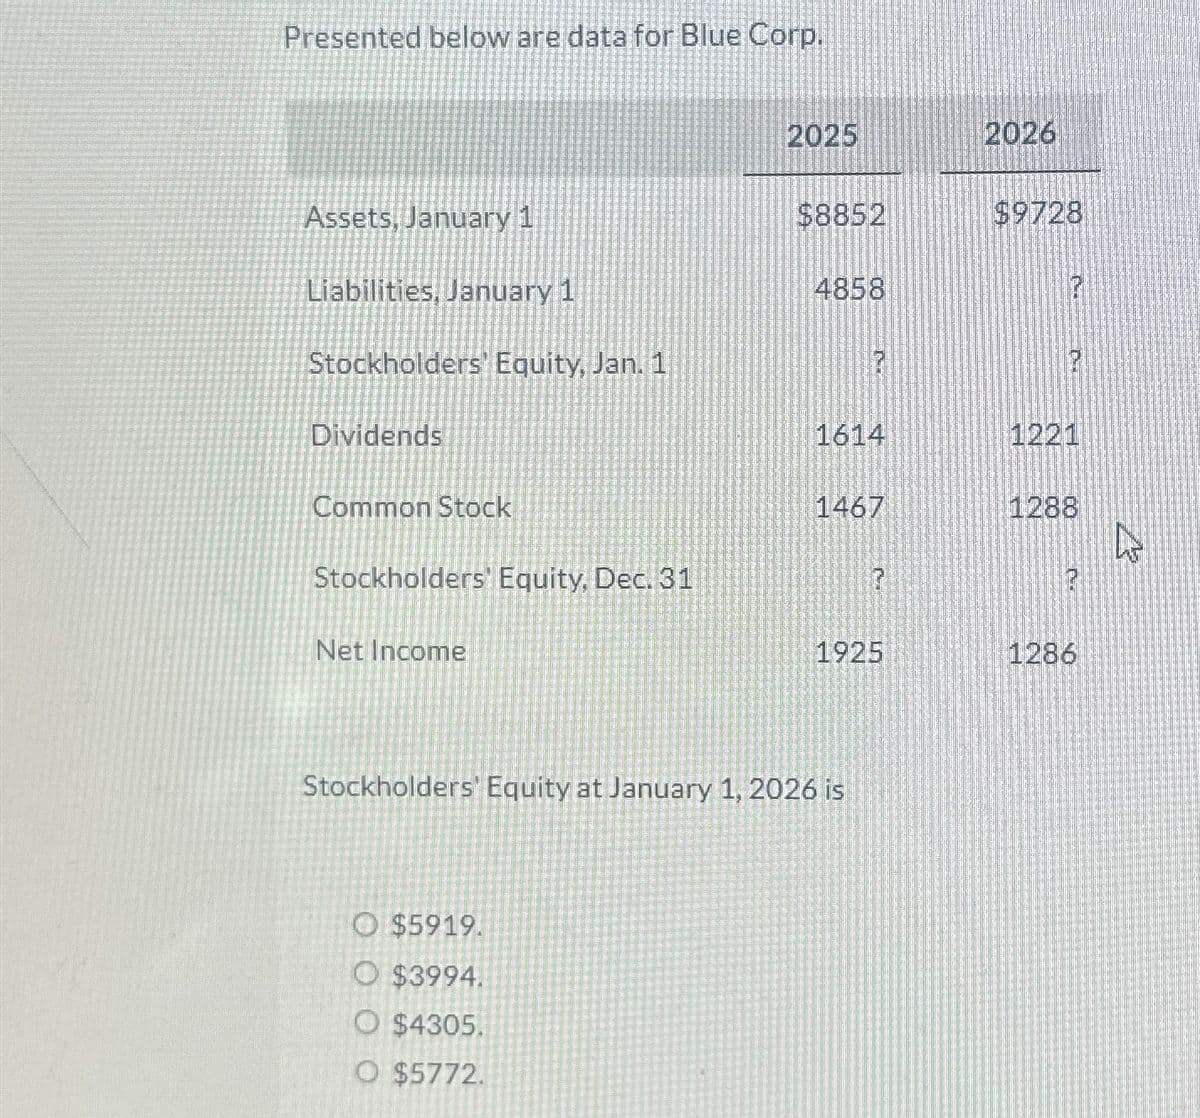 Presented below are data for Blue Corp.
Assets, January 1
Liabilities, January 1
Stockholders' Equity, Jan. 1
Dividends
Common Stock
Stockholders' Equity, Dec. 31
Net Income
2025
O $5919.
O $3994.
O $4305.
O $5772.
$8852
4858
1614
1467
Stockholders' Equity at January 1, 2026 is
?
1925
2026
$9728
1221
1288
1286